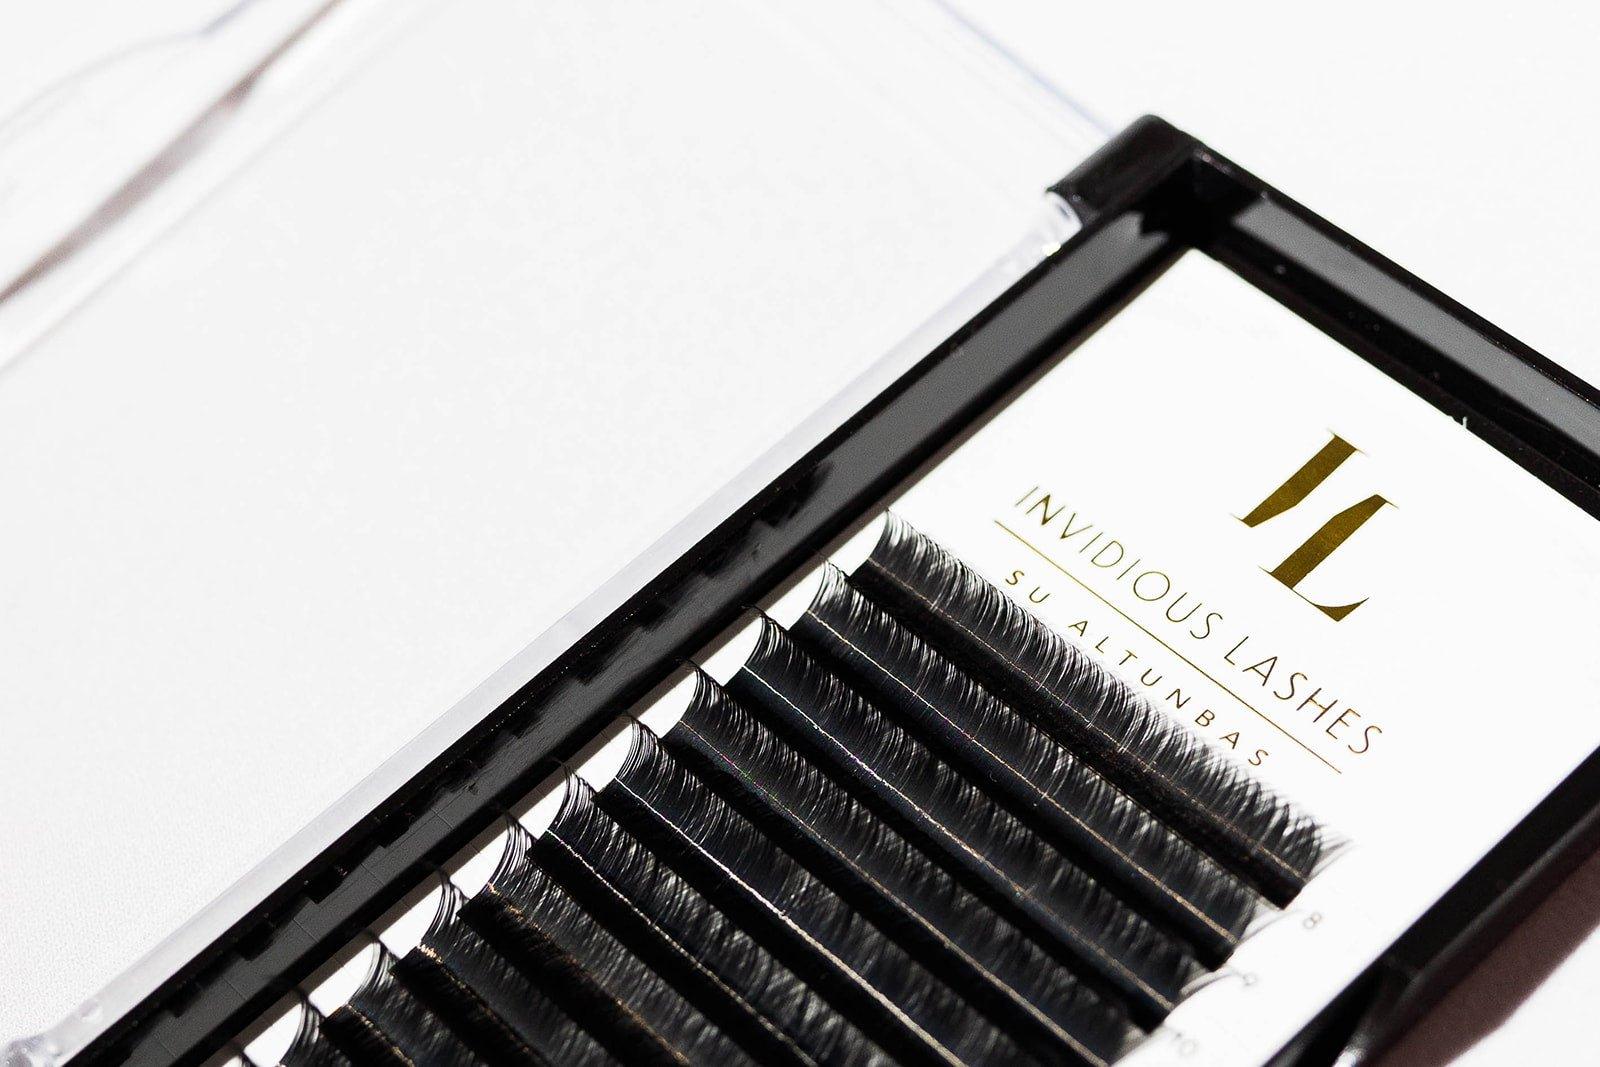 Tray of Classic Eyelash Extensions in D Curl with 0.15 mm thickness, showcasing individual lashes designed for creating a natural yet enhanced lash look.